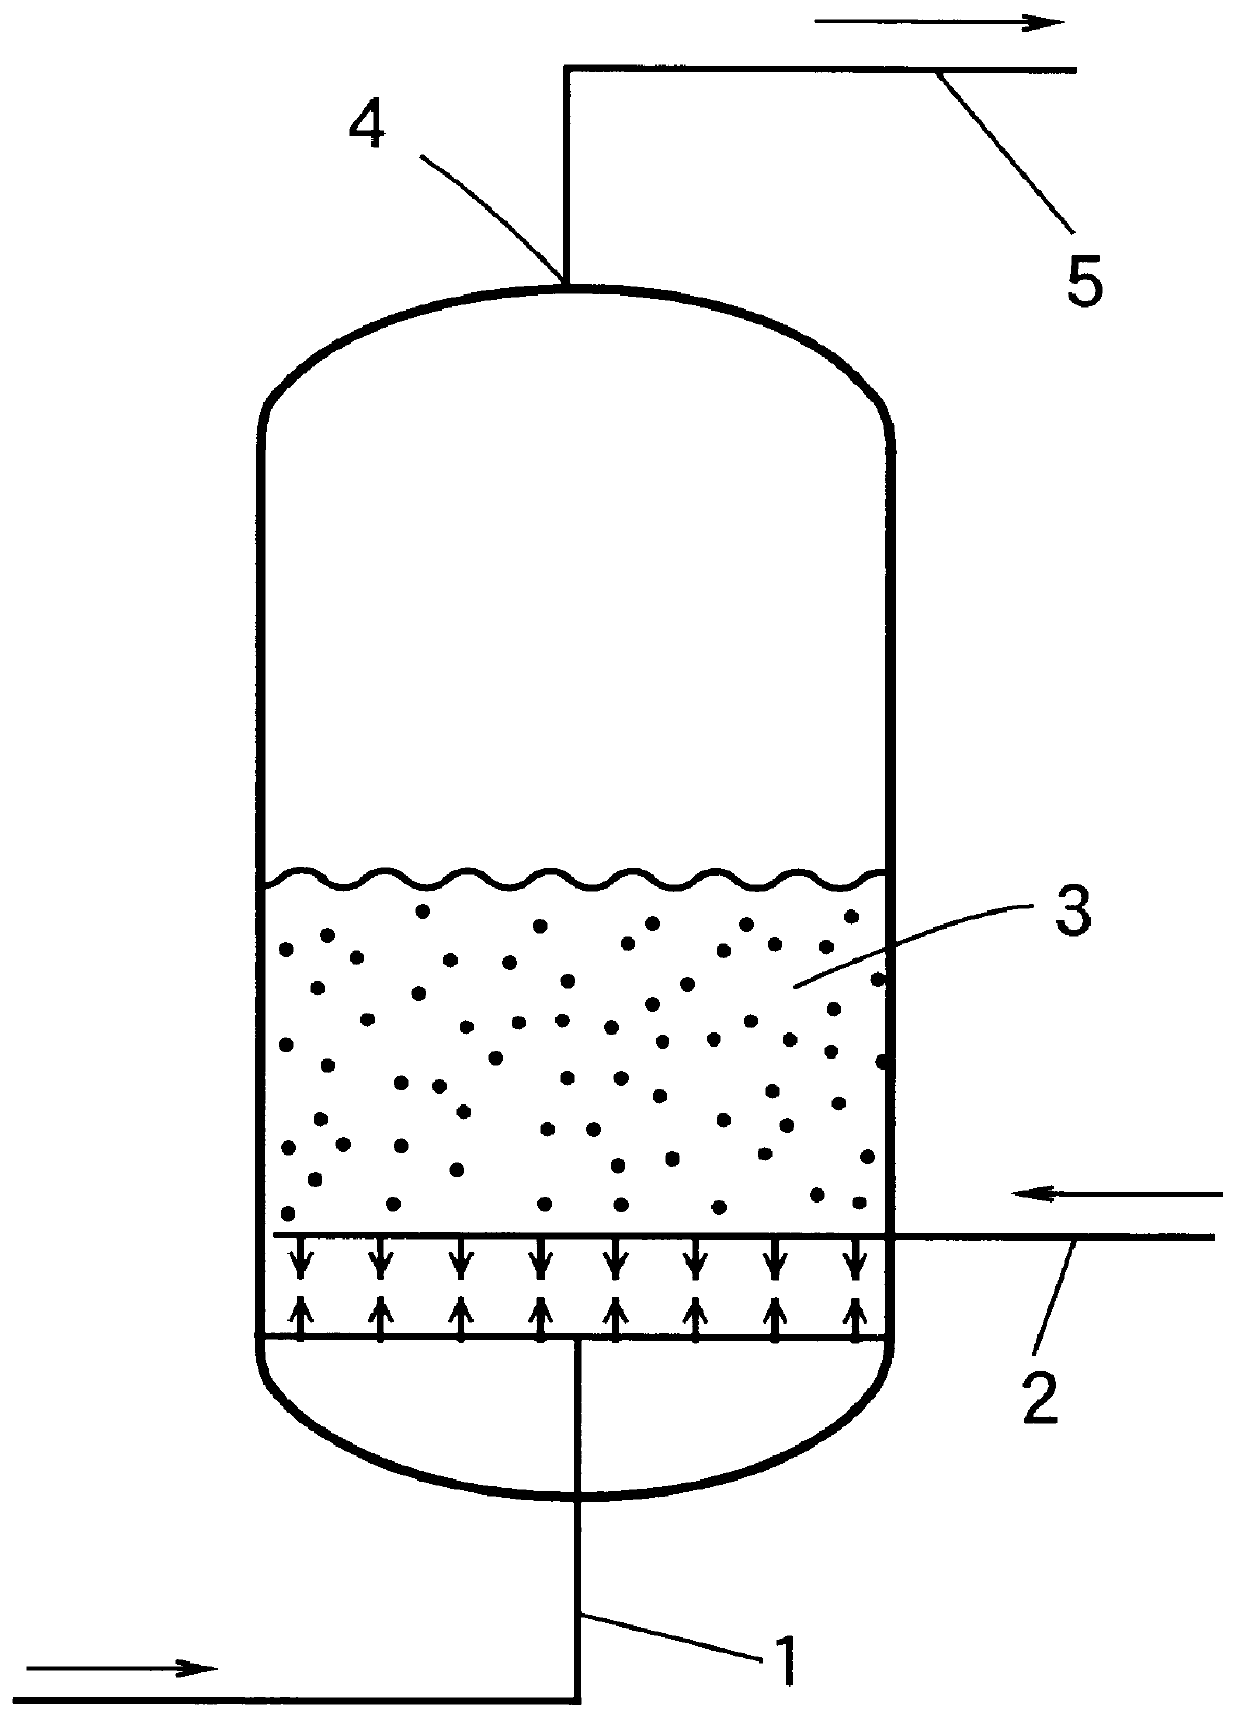 Process for producing acrylonitrile or methacrylonitrile from propane or isobutane by ammoxidation